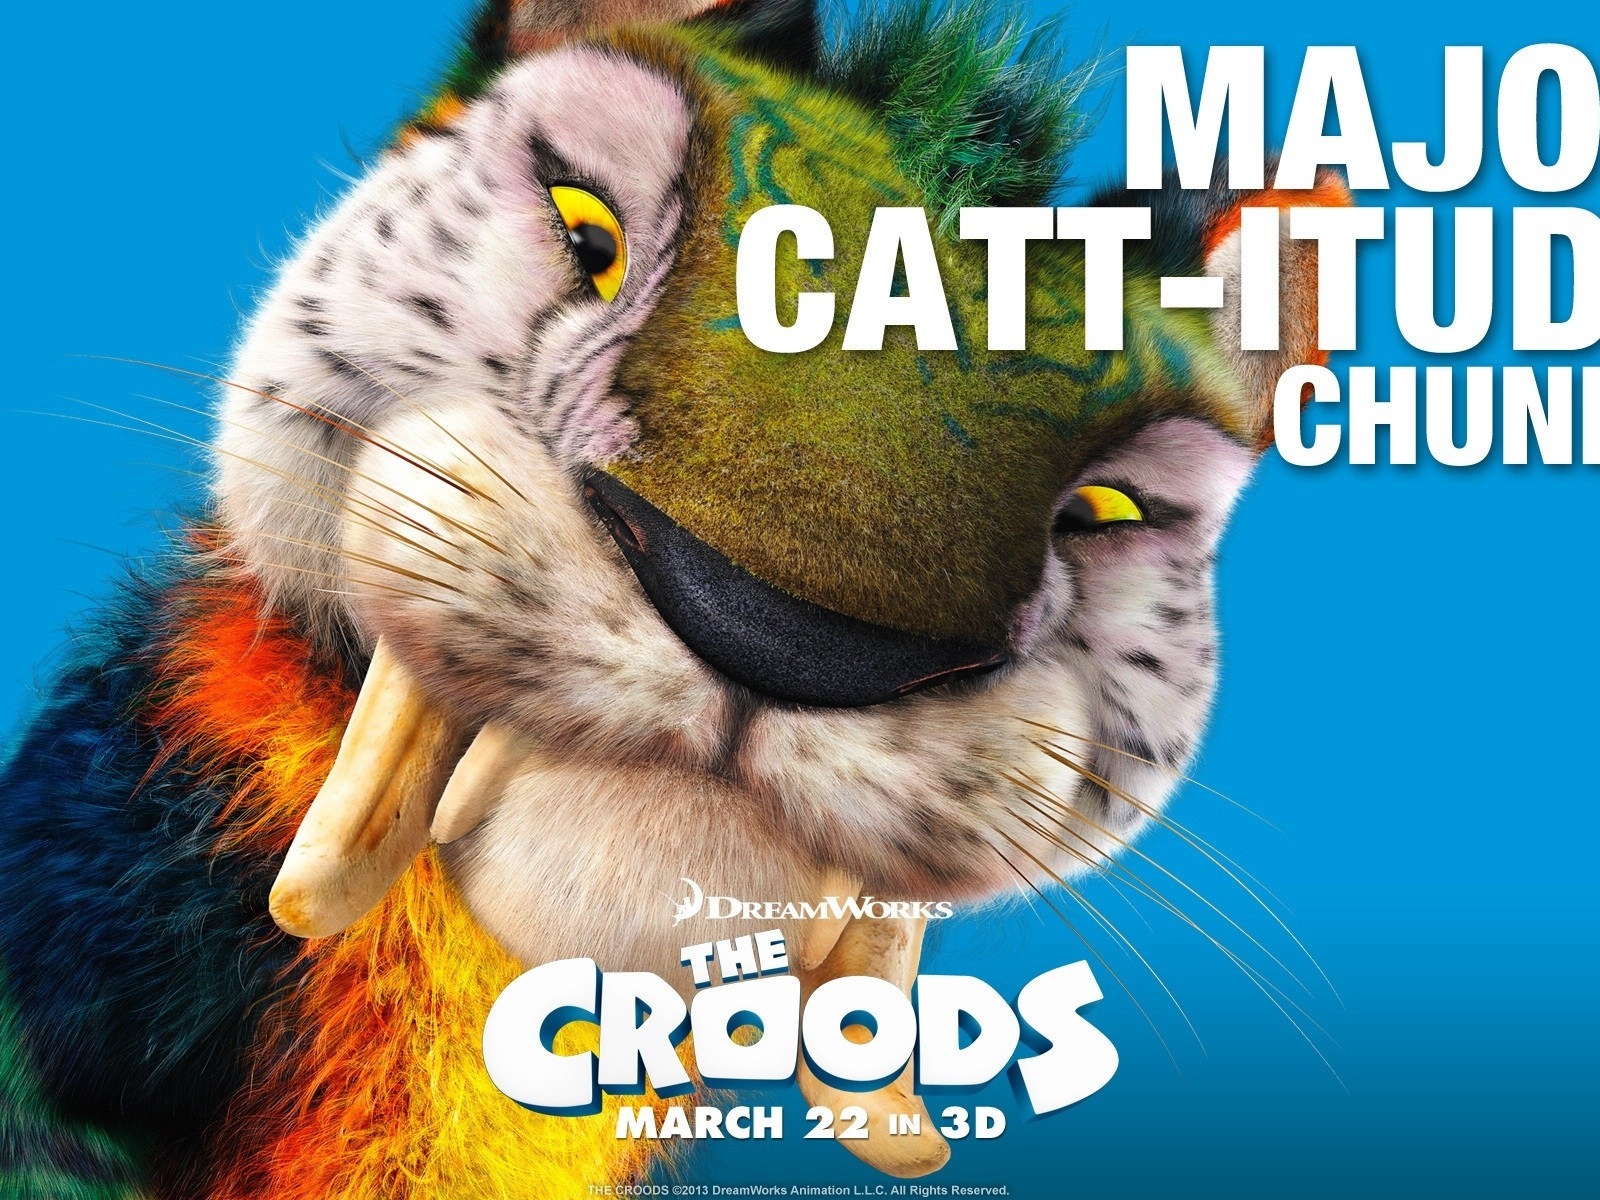 The Croods HD movie wallpapers #12 - 1600x1200